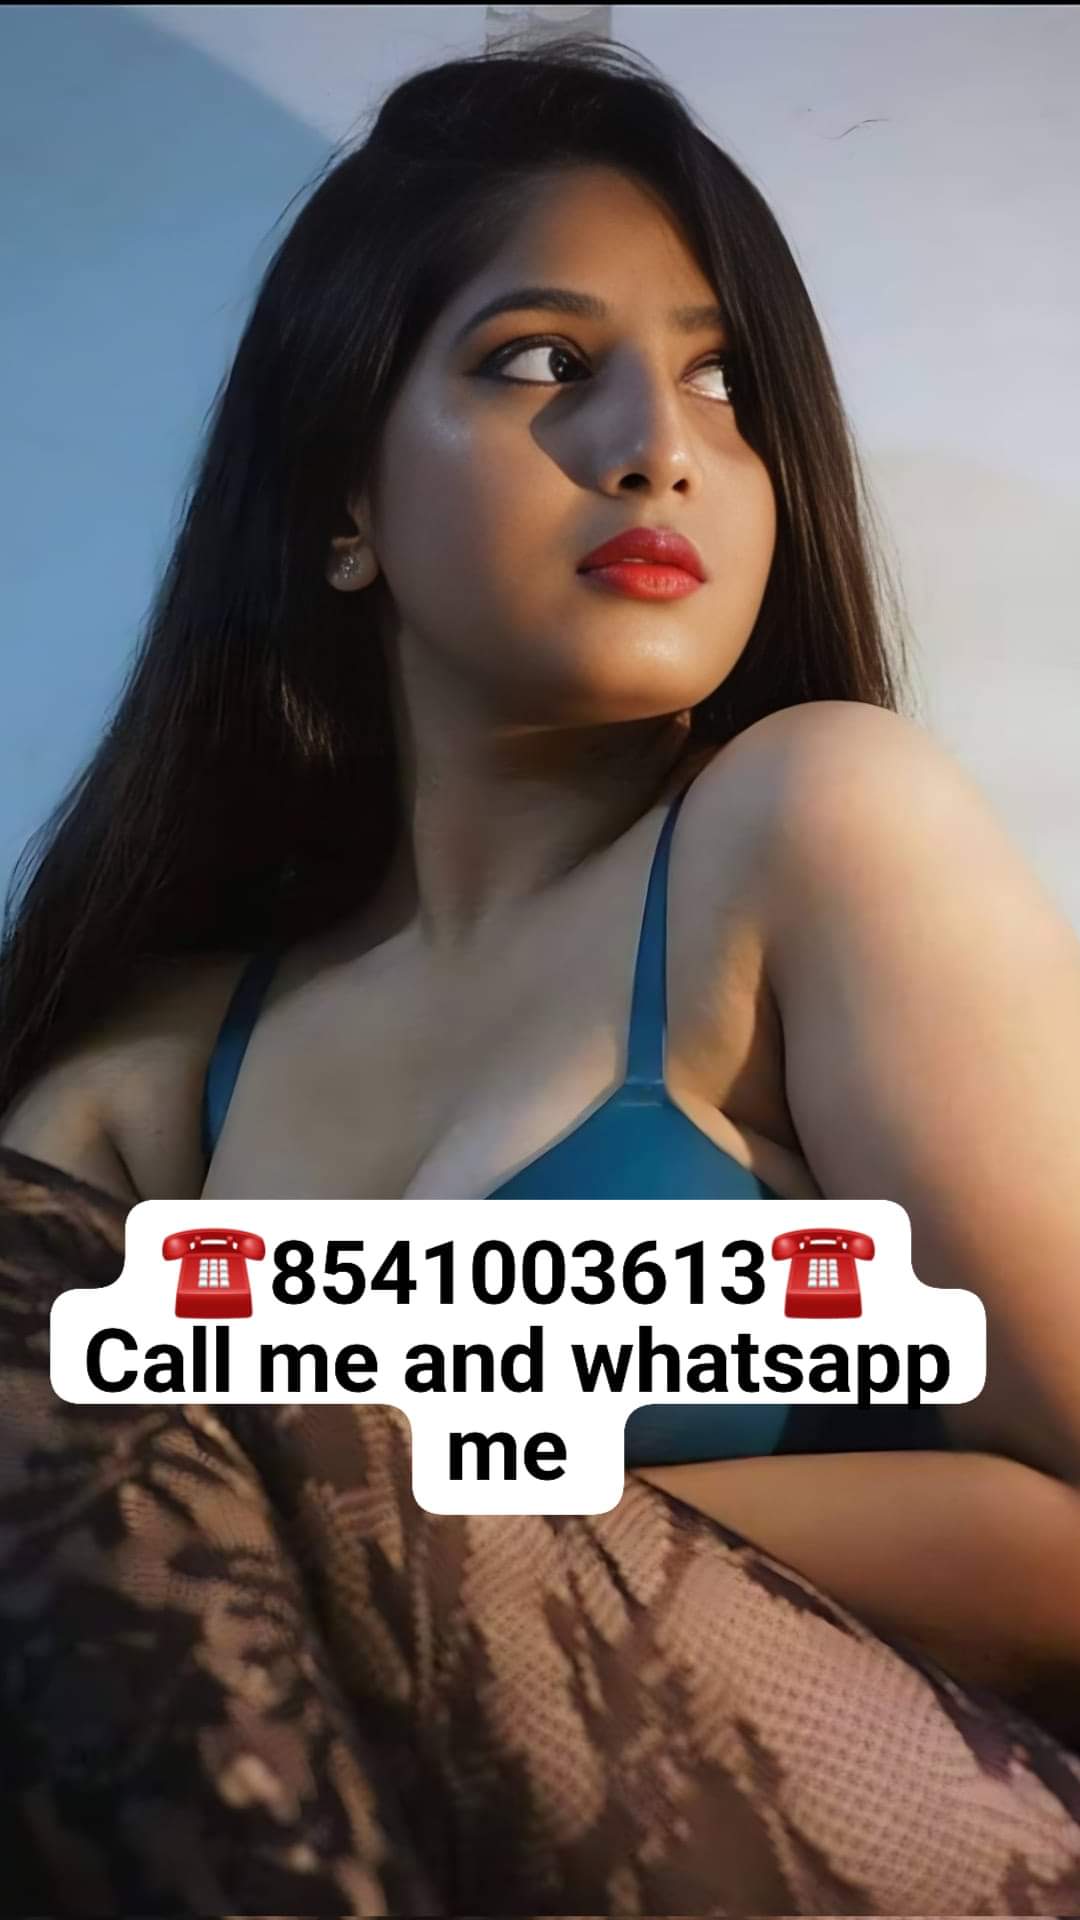 Bommanahalli Call girl low price hot and smart sexy girls cash payment